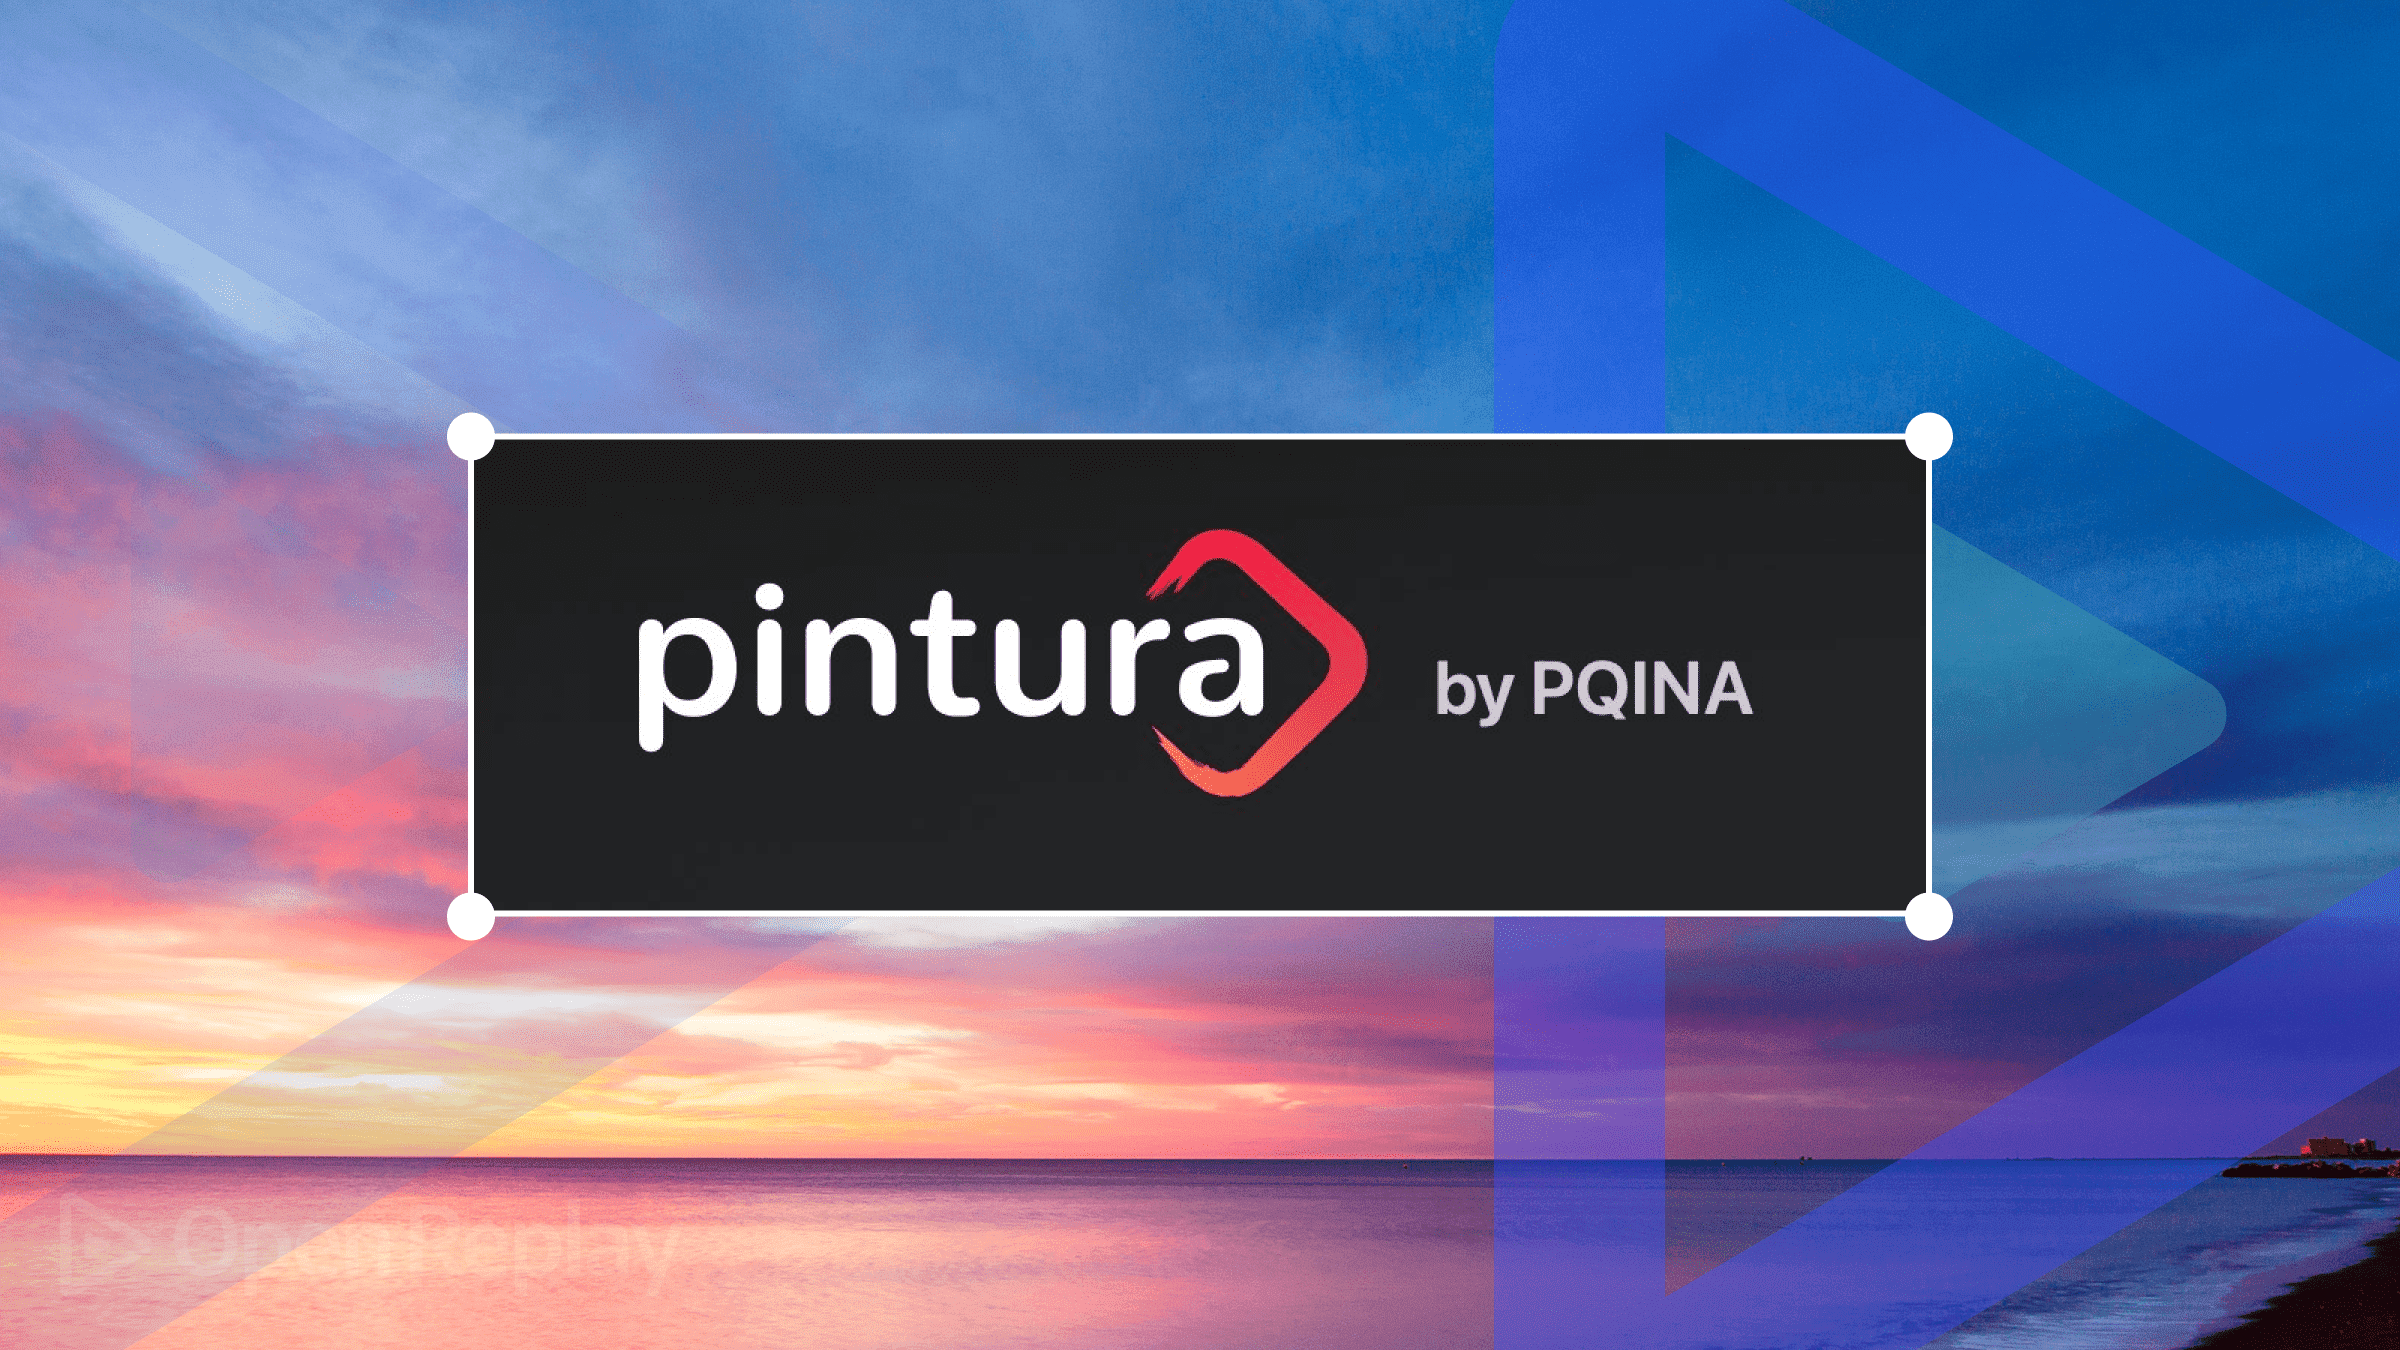 Add an Image Editor to your app with Pintura